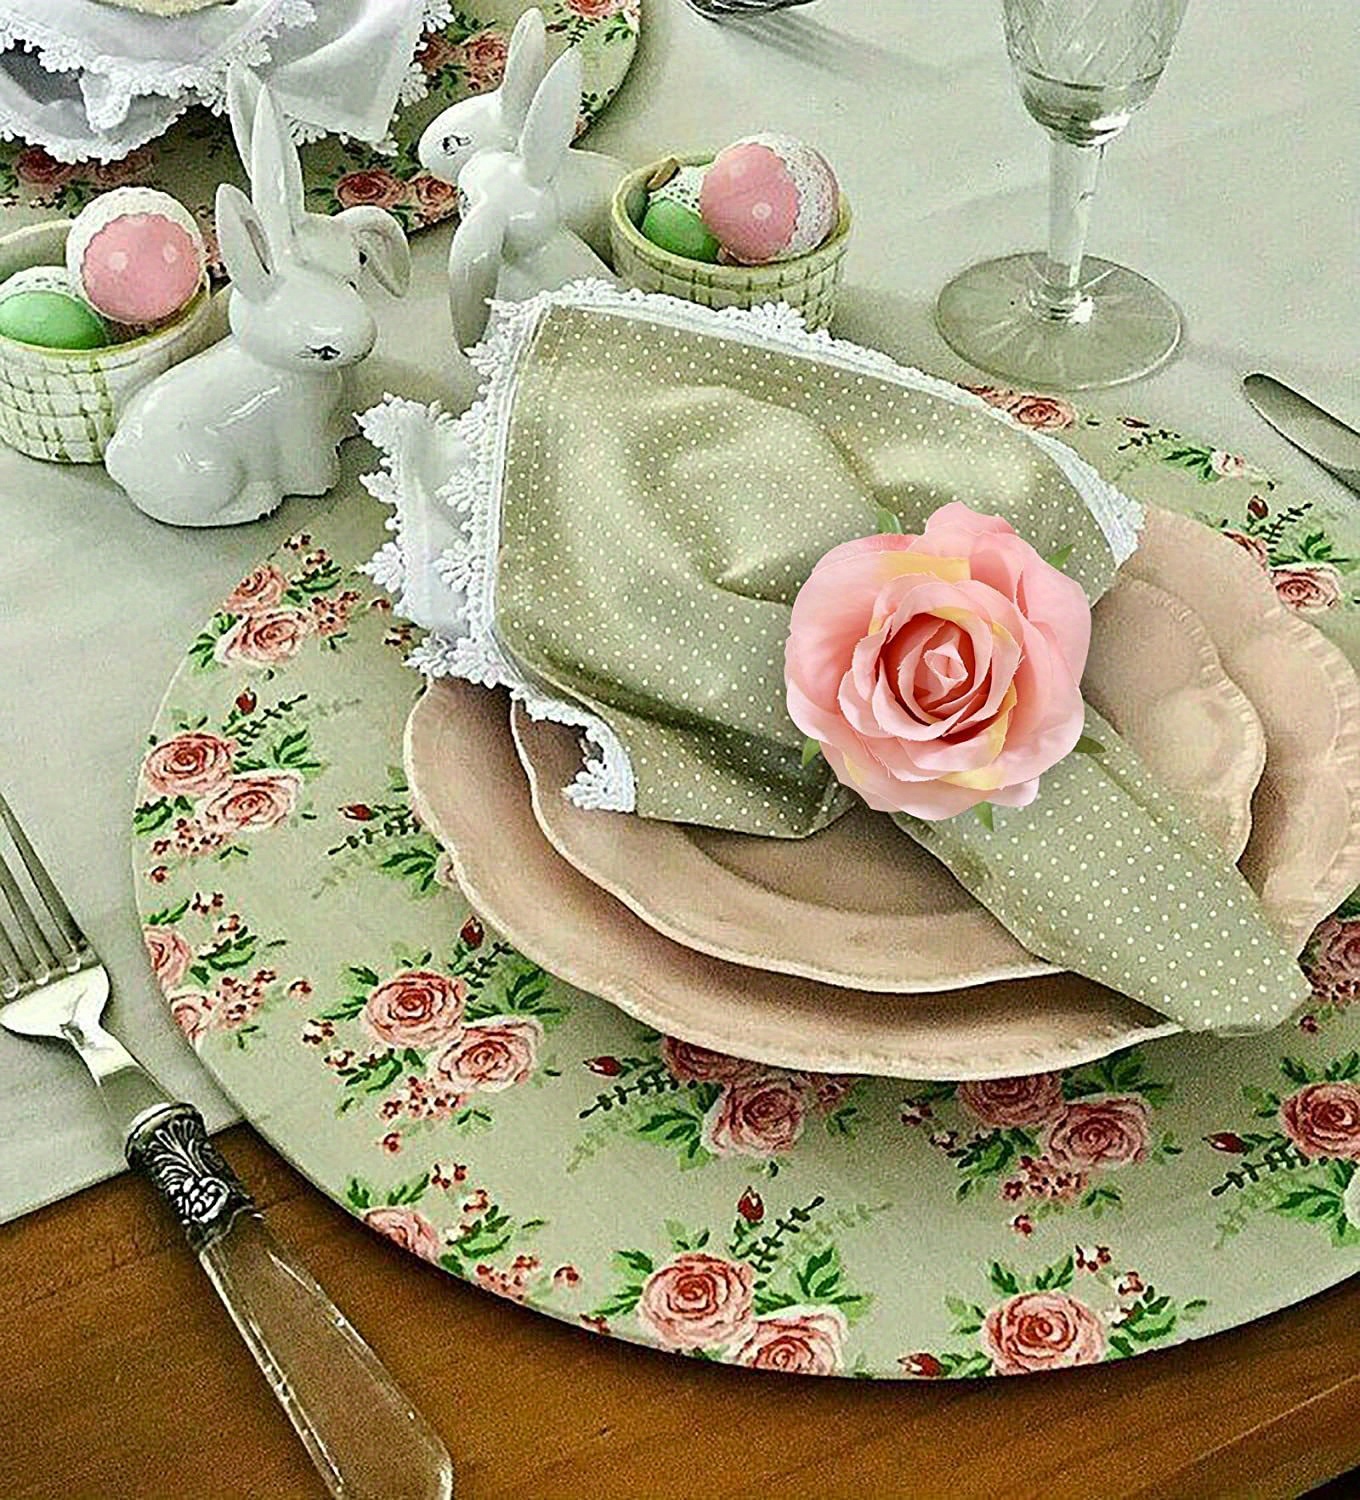 6/4/2/1PC Bloom Napkin Rings Flower Types Decoration Napkin Holder Plum  Blossom Napkin Buckle Hotel Parties Feast Dining Table - AliExpress